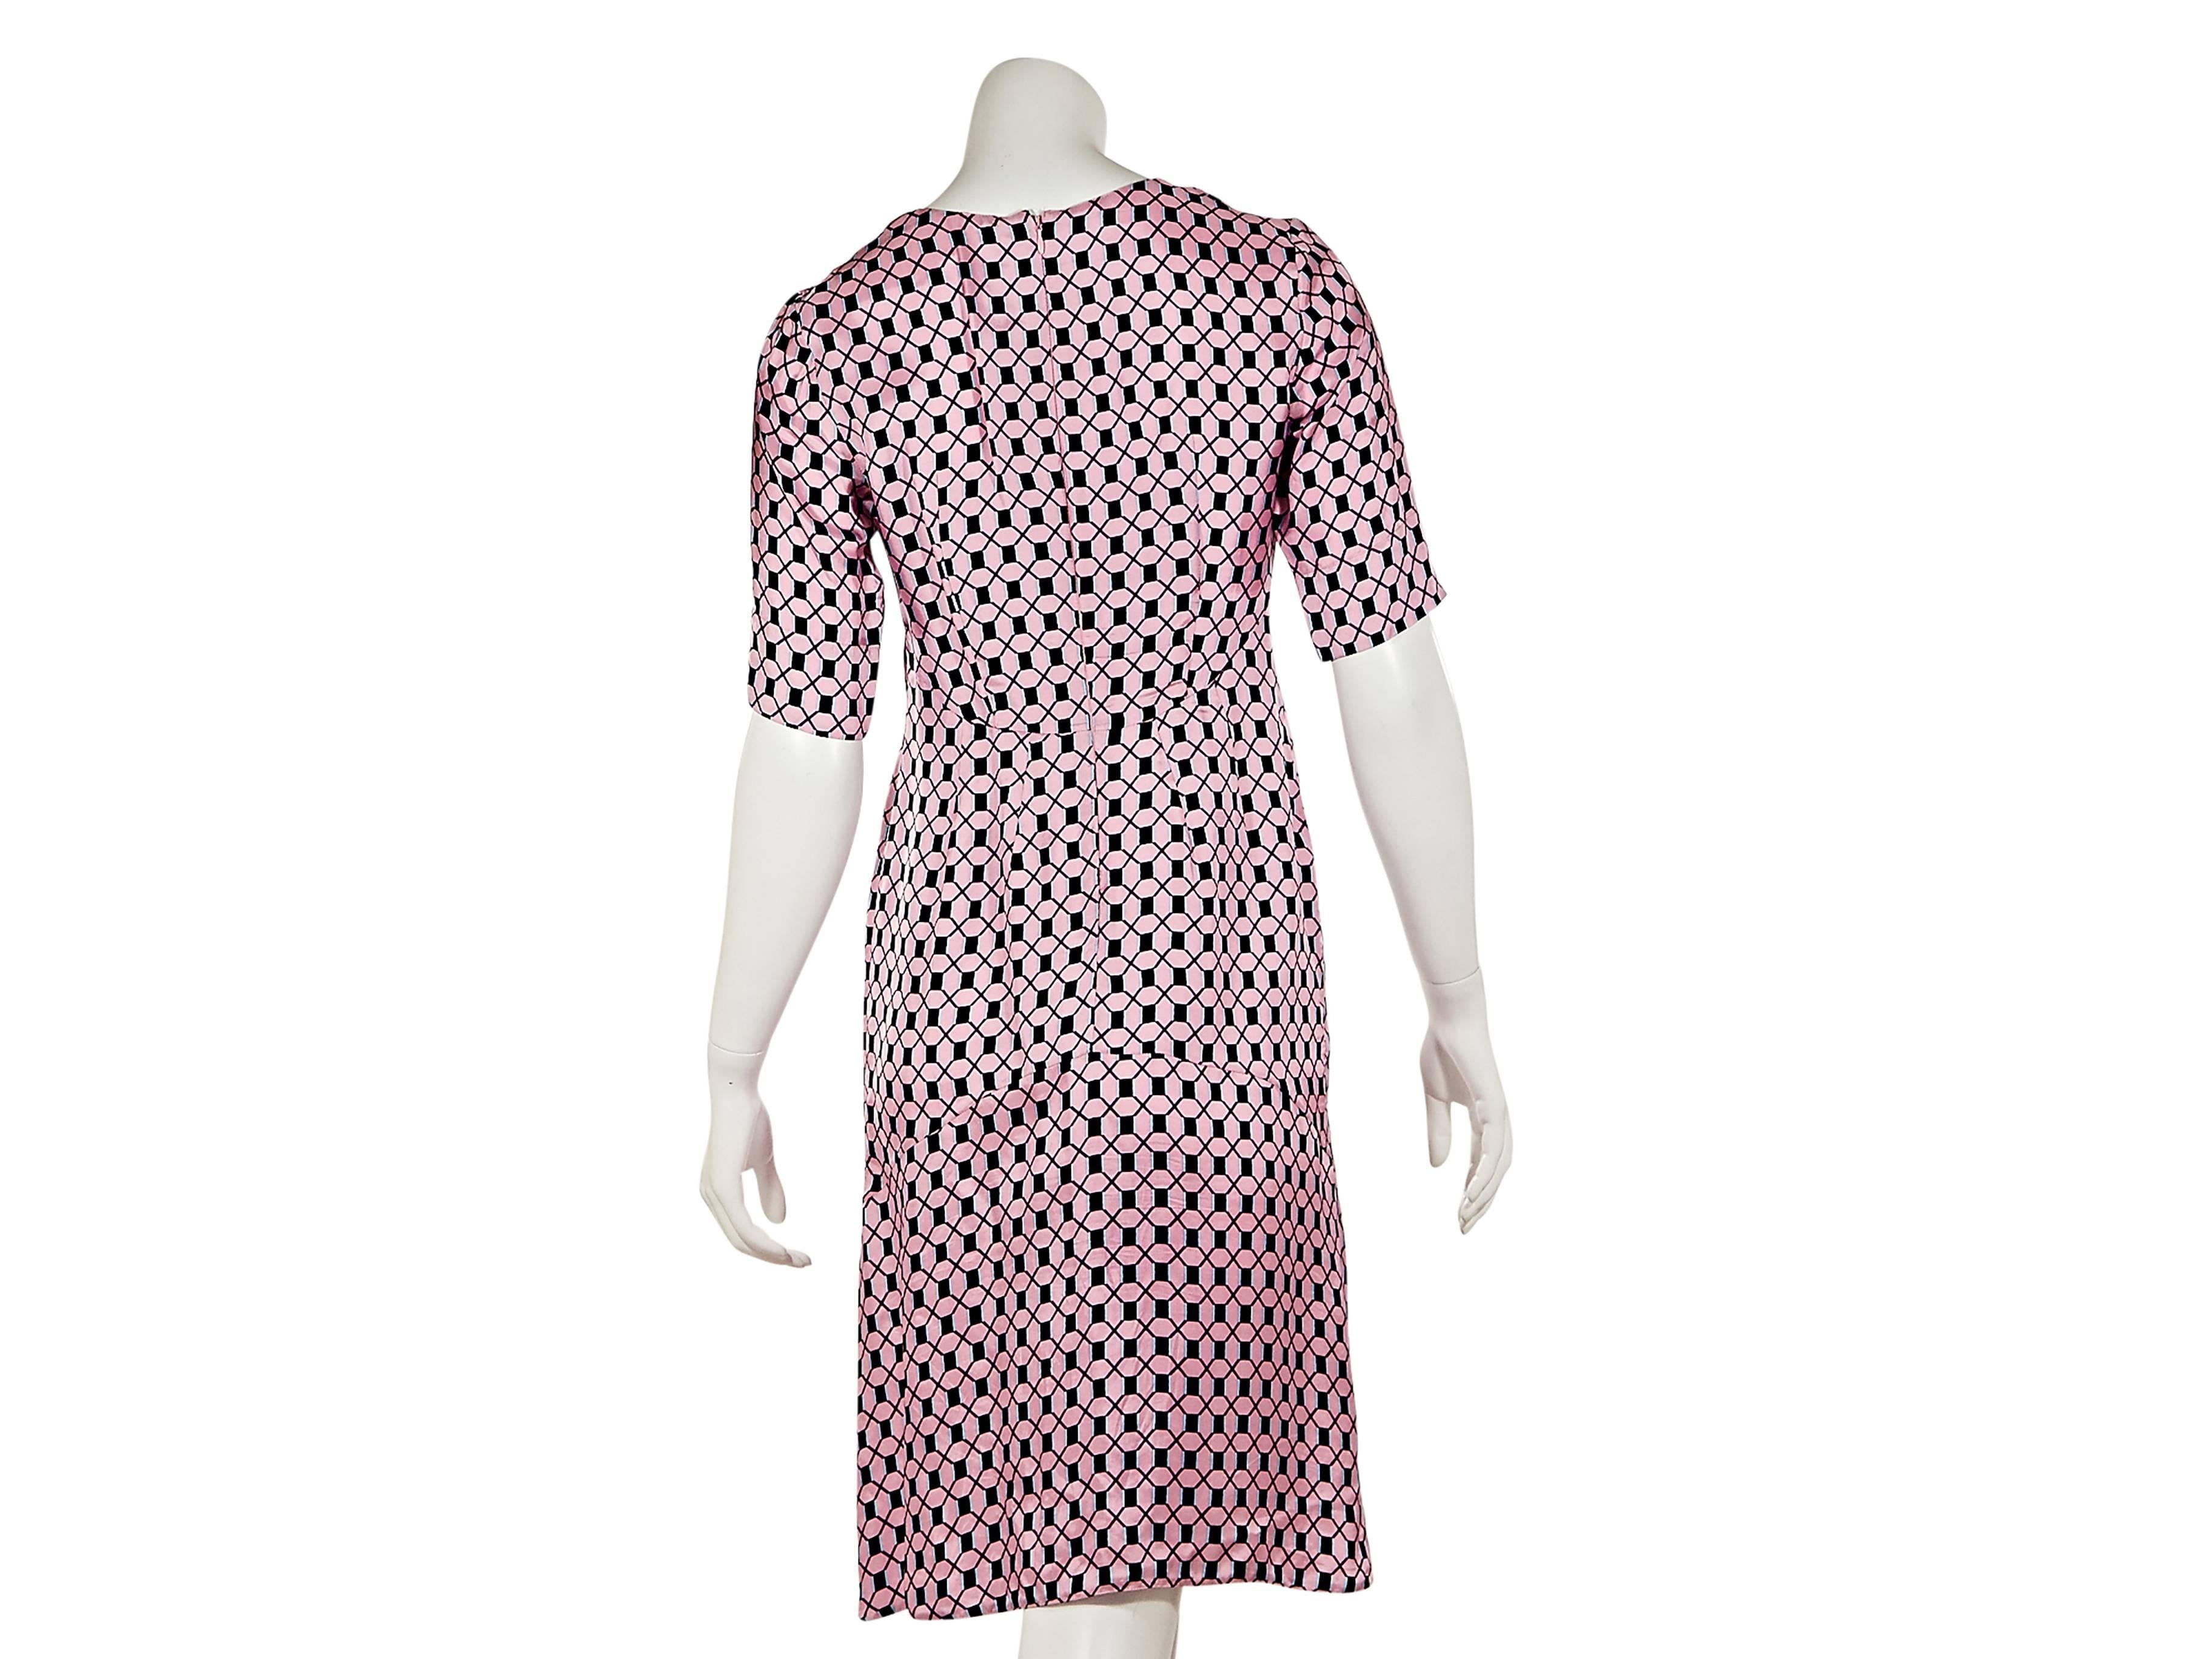 Pink, black and blue geometric-printed shift dress by Marni.  Jewelneck.  Short sleeves.  Concealed back zip closure. 